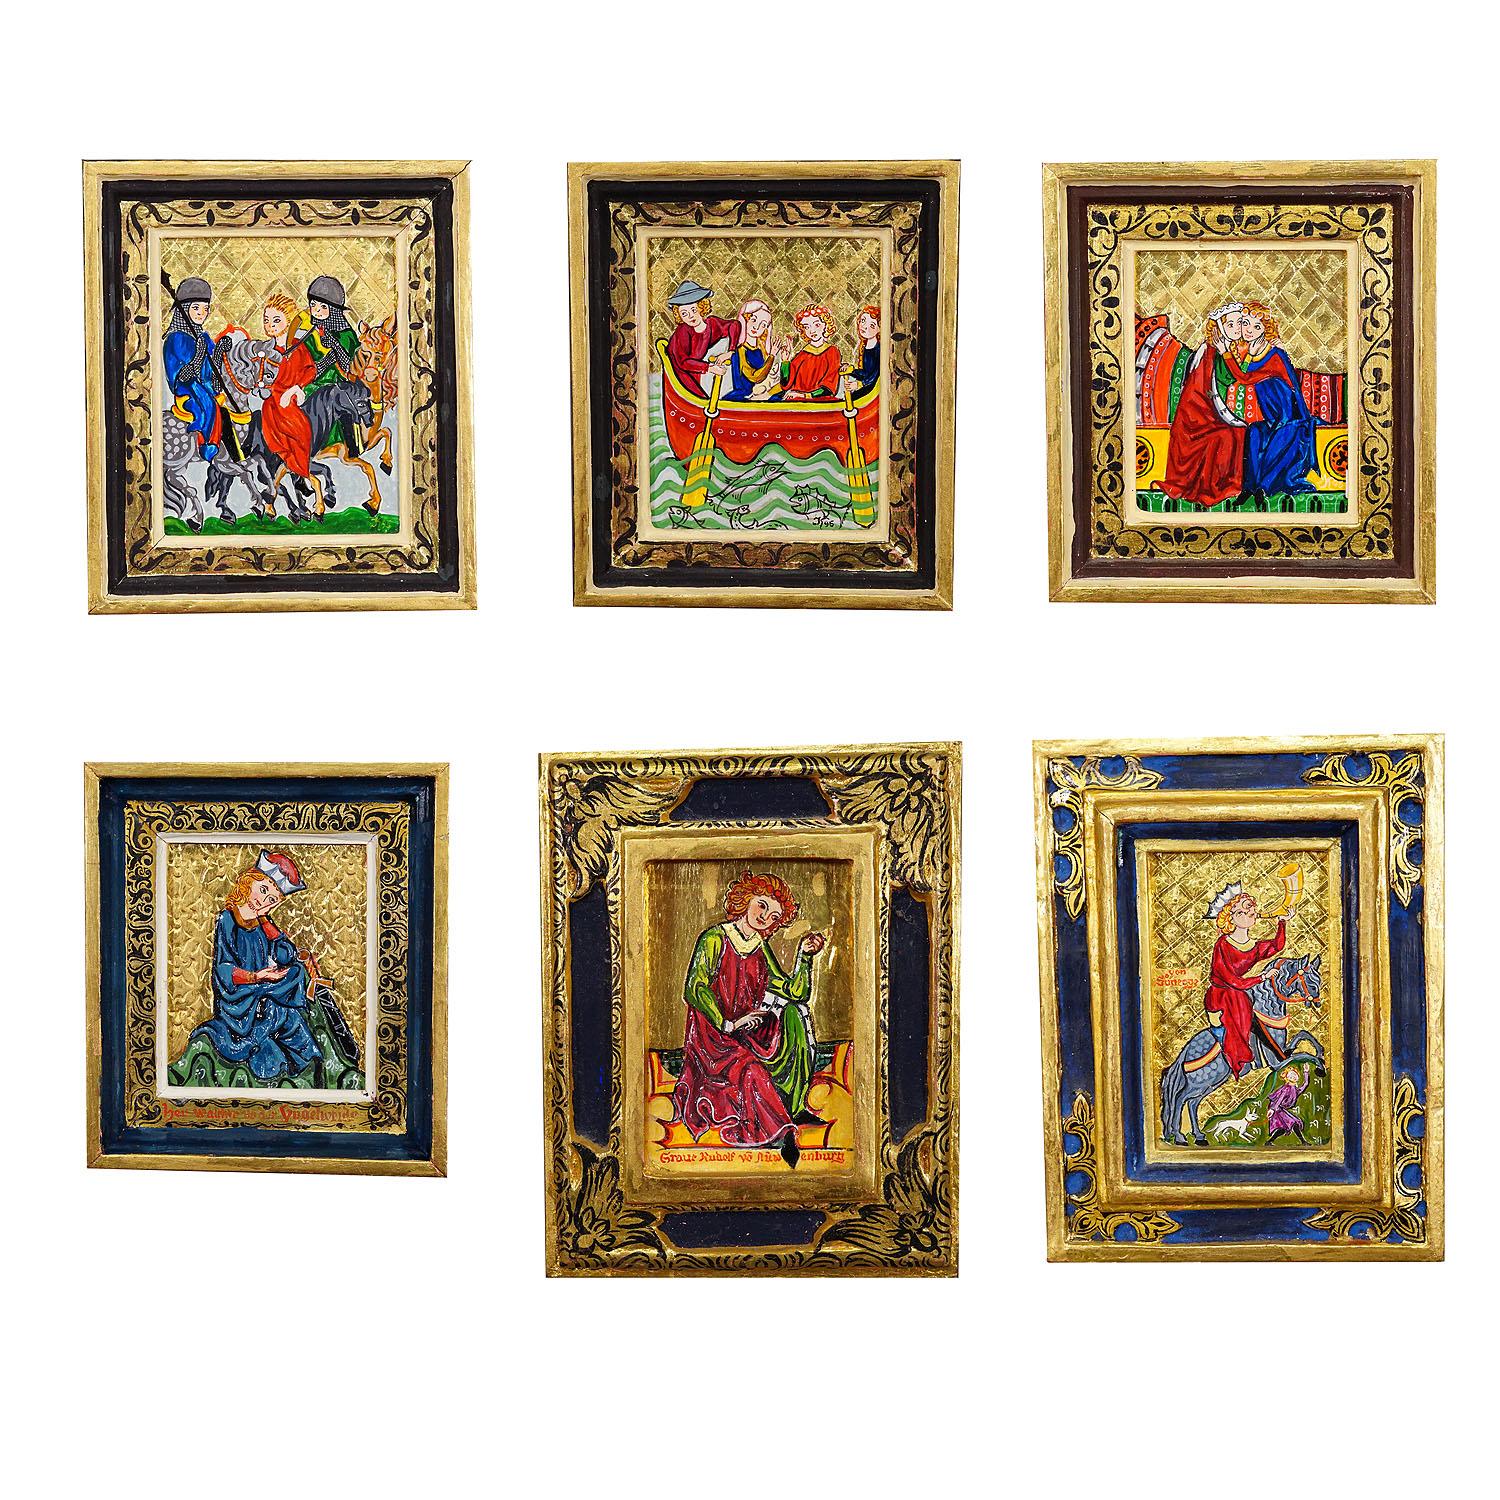 Set of Six Vintage Paintings with Minstrel Scenes from the Manesse Song Manuscript

A set of six paintings depicting minstrel scenes from the manesse song handbook (Manesse Codex) which was written in the 12th and 13th century. The paintings depict